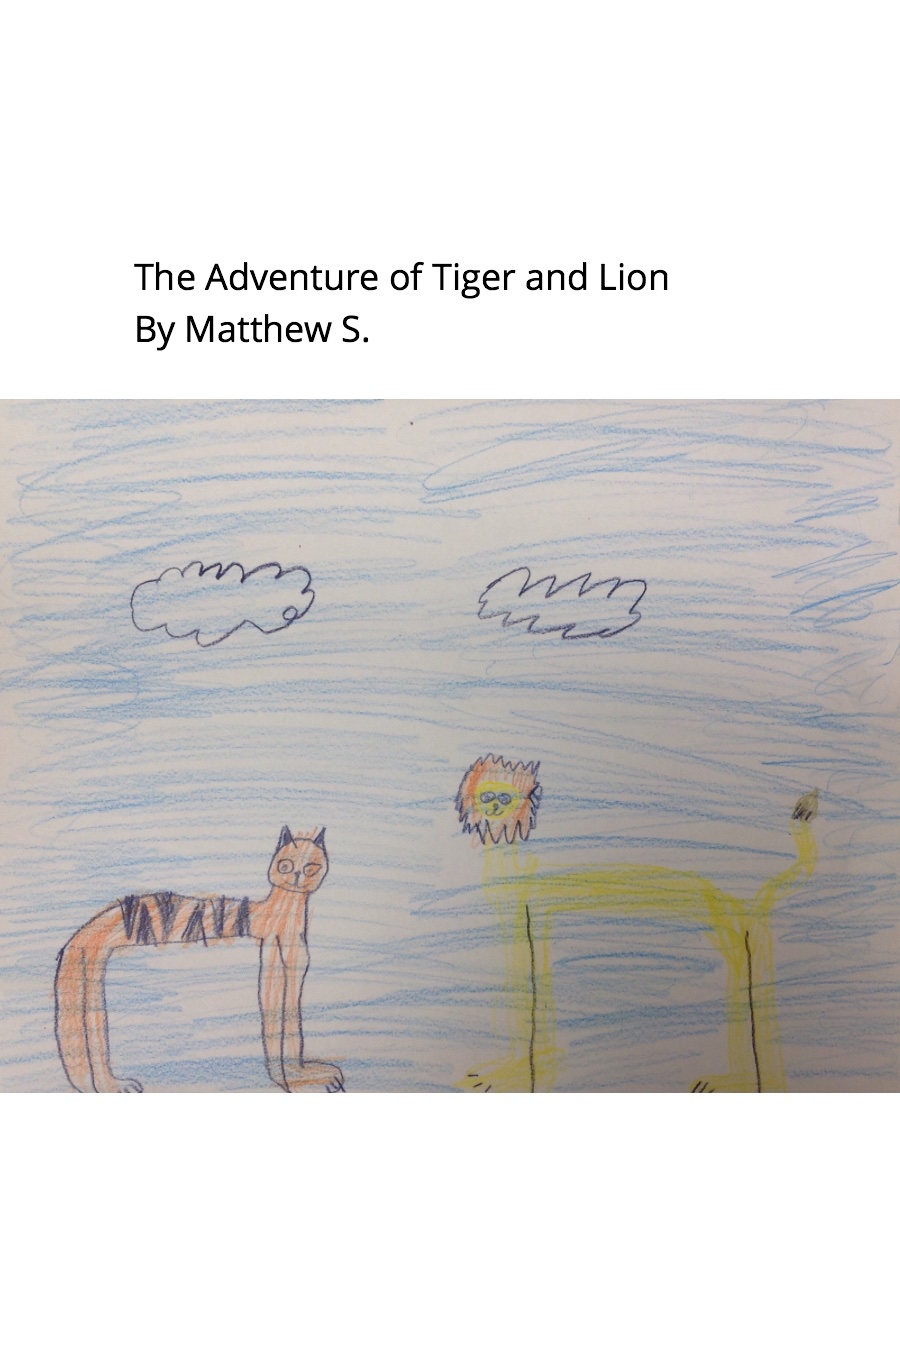 The Adventure of Lion and Tiger by Matthew S